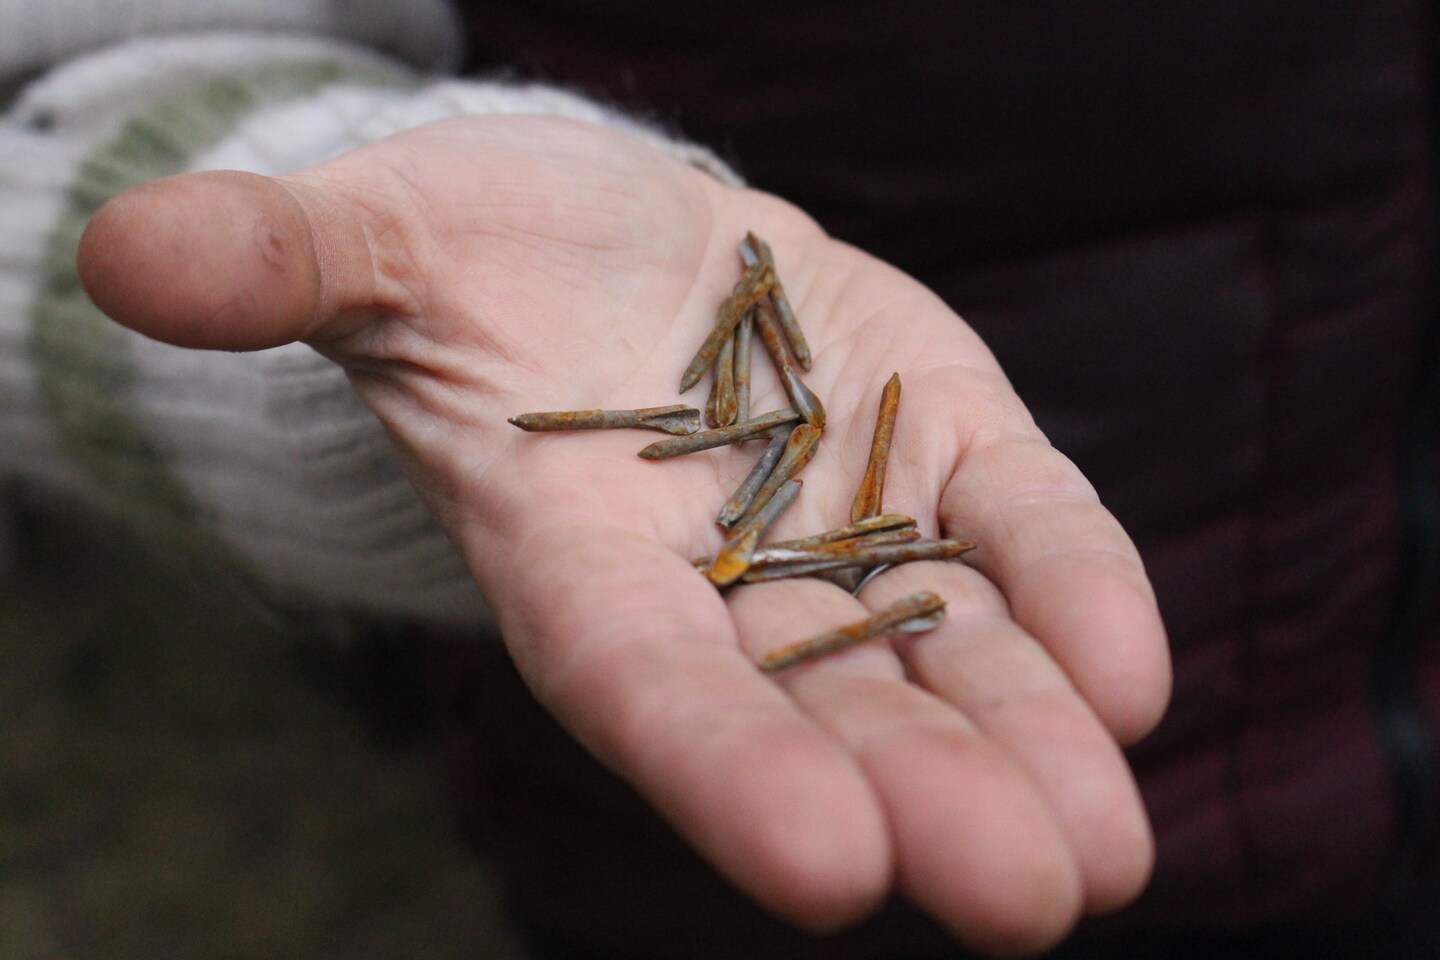 Lethal darts were fired into a Ukrainian neighborhood by the thousands